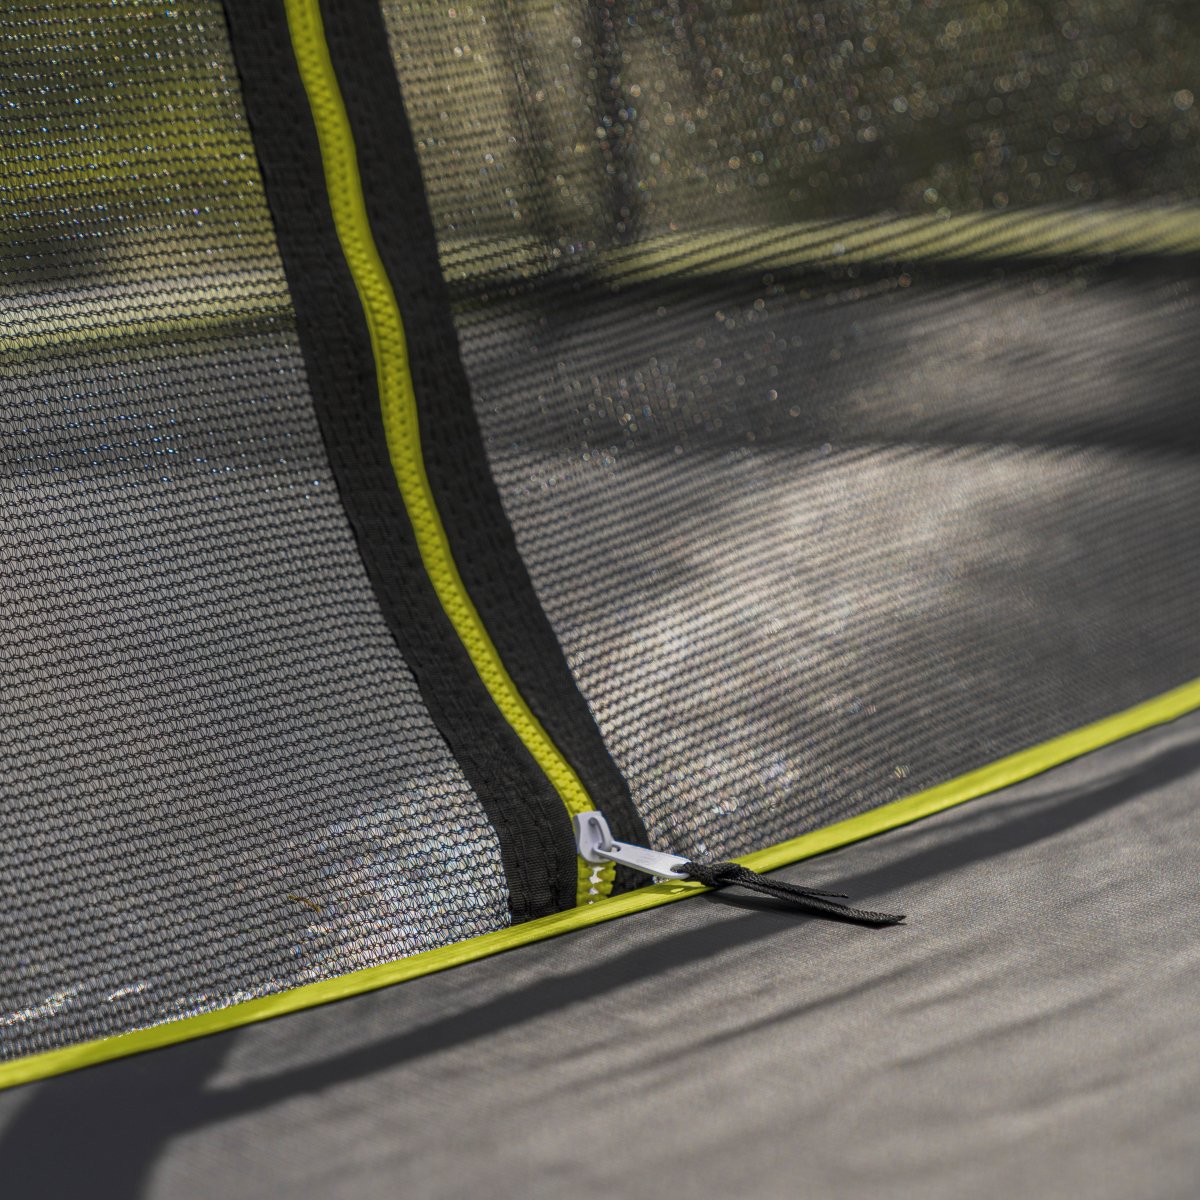 Rebo Summit Oval Trampoline and Safety Enclosure - Summit 1600